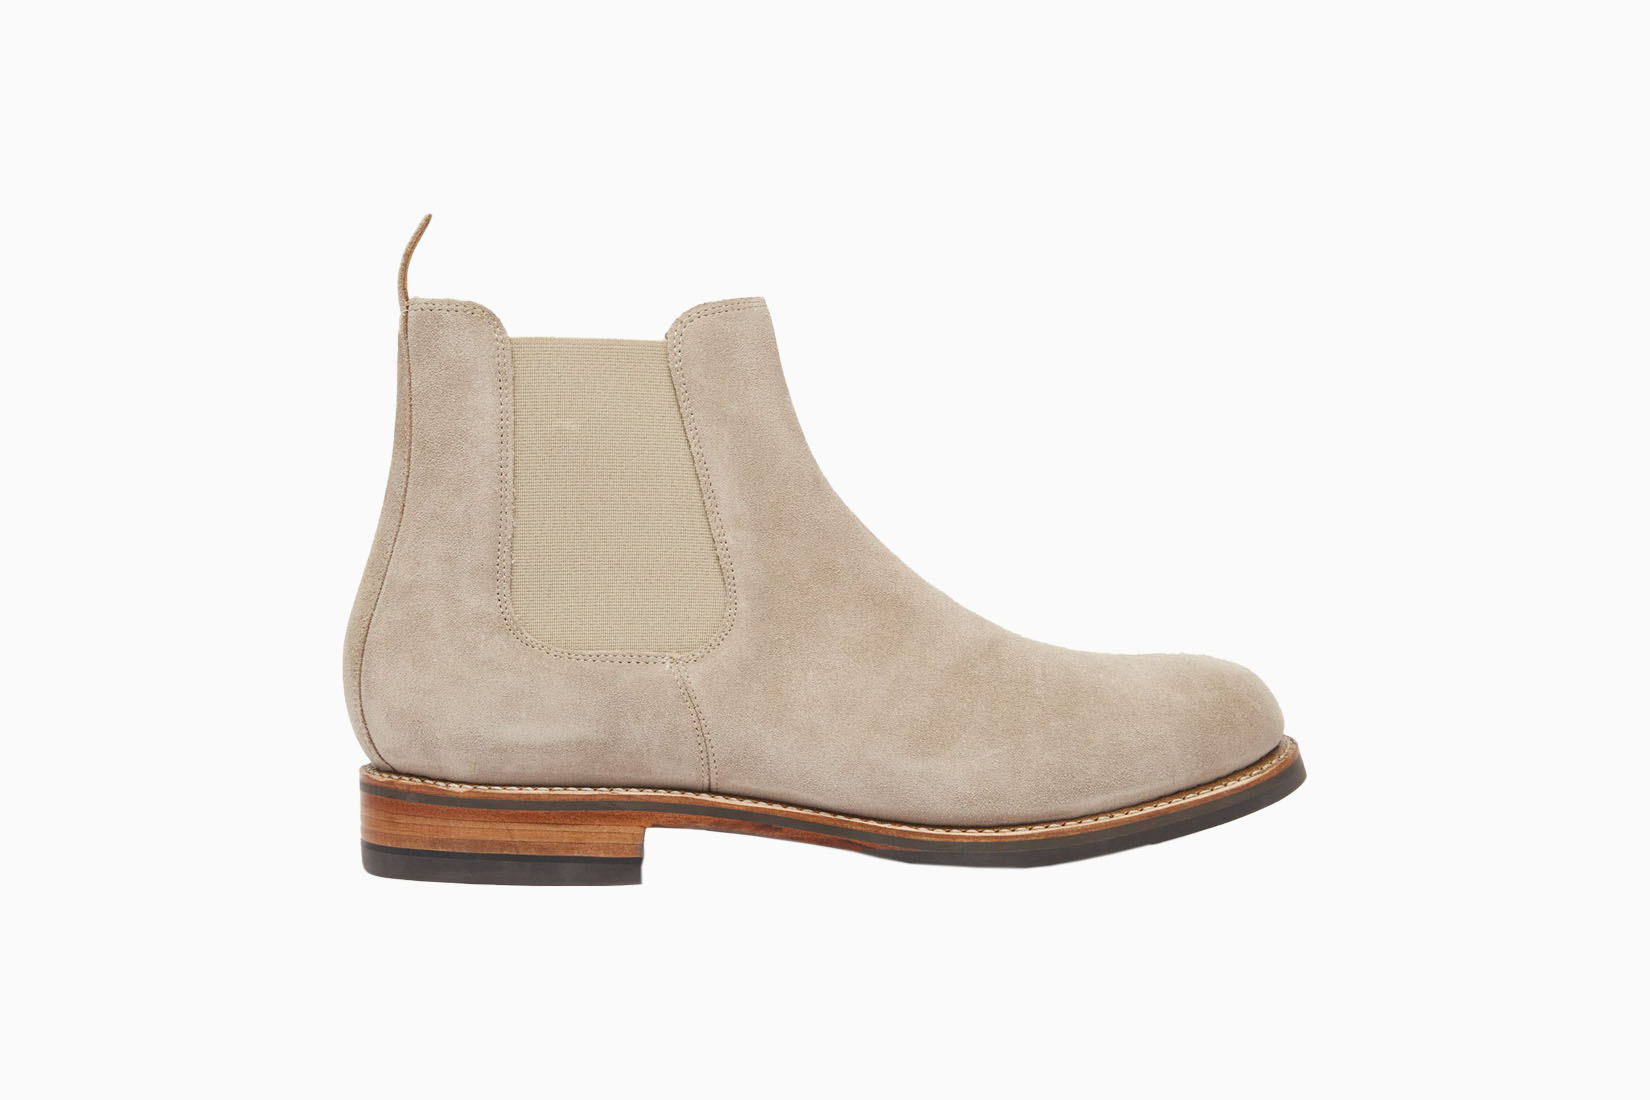 12 Best Men’s Chelsea Boots For Every Style & Budget (2021)